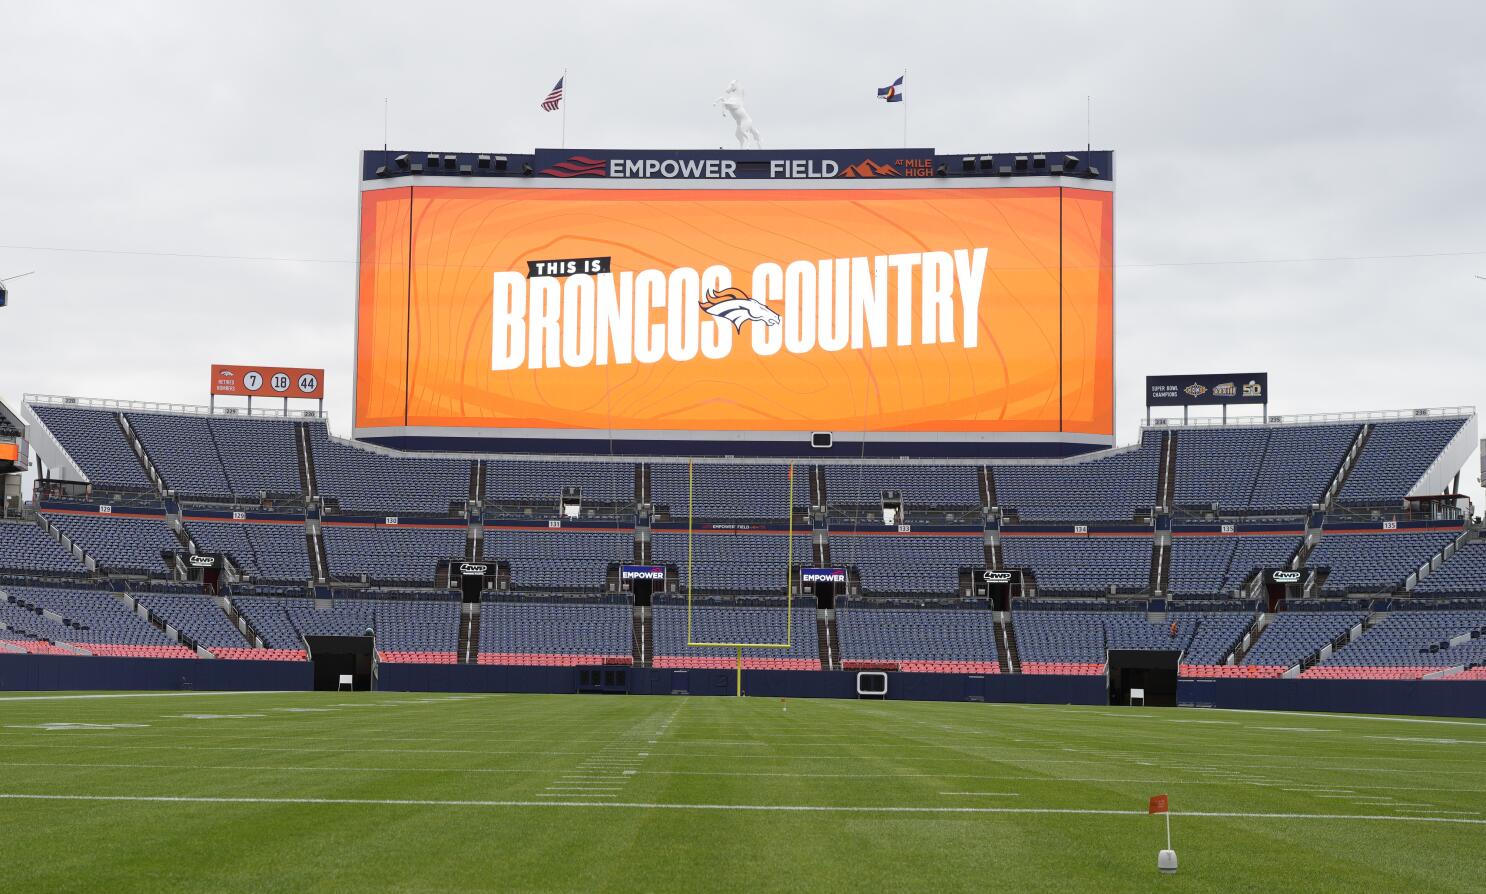 Broncos unveil $100 million upgrade to Empower Field at Mile High